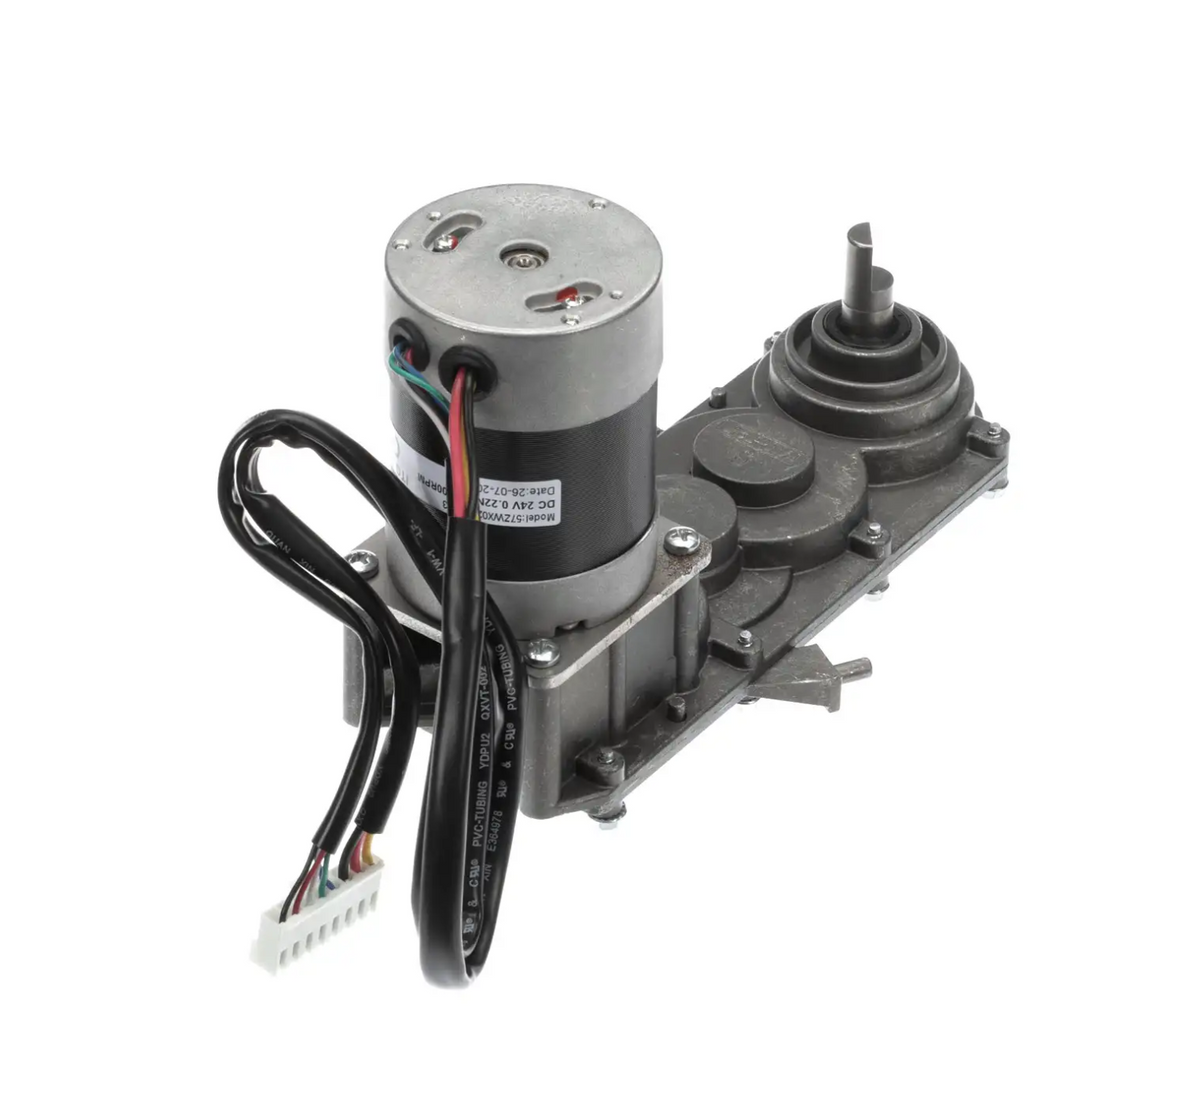 Crathco GT Complete Gear Motor MB90W